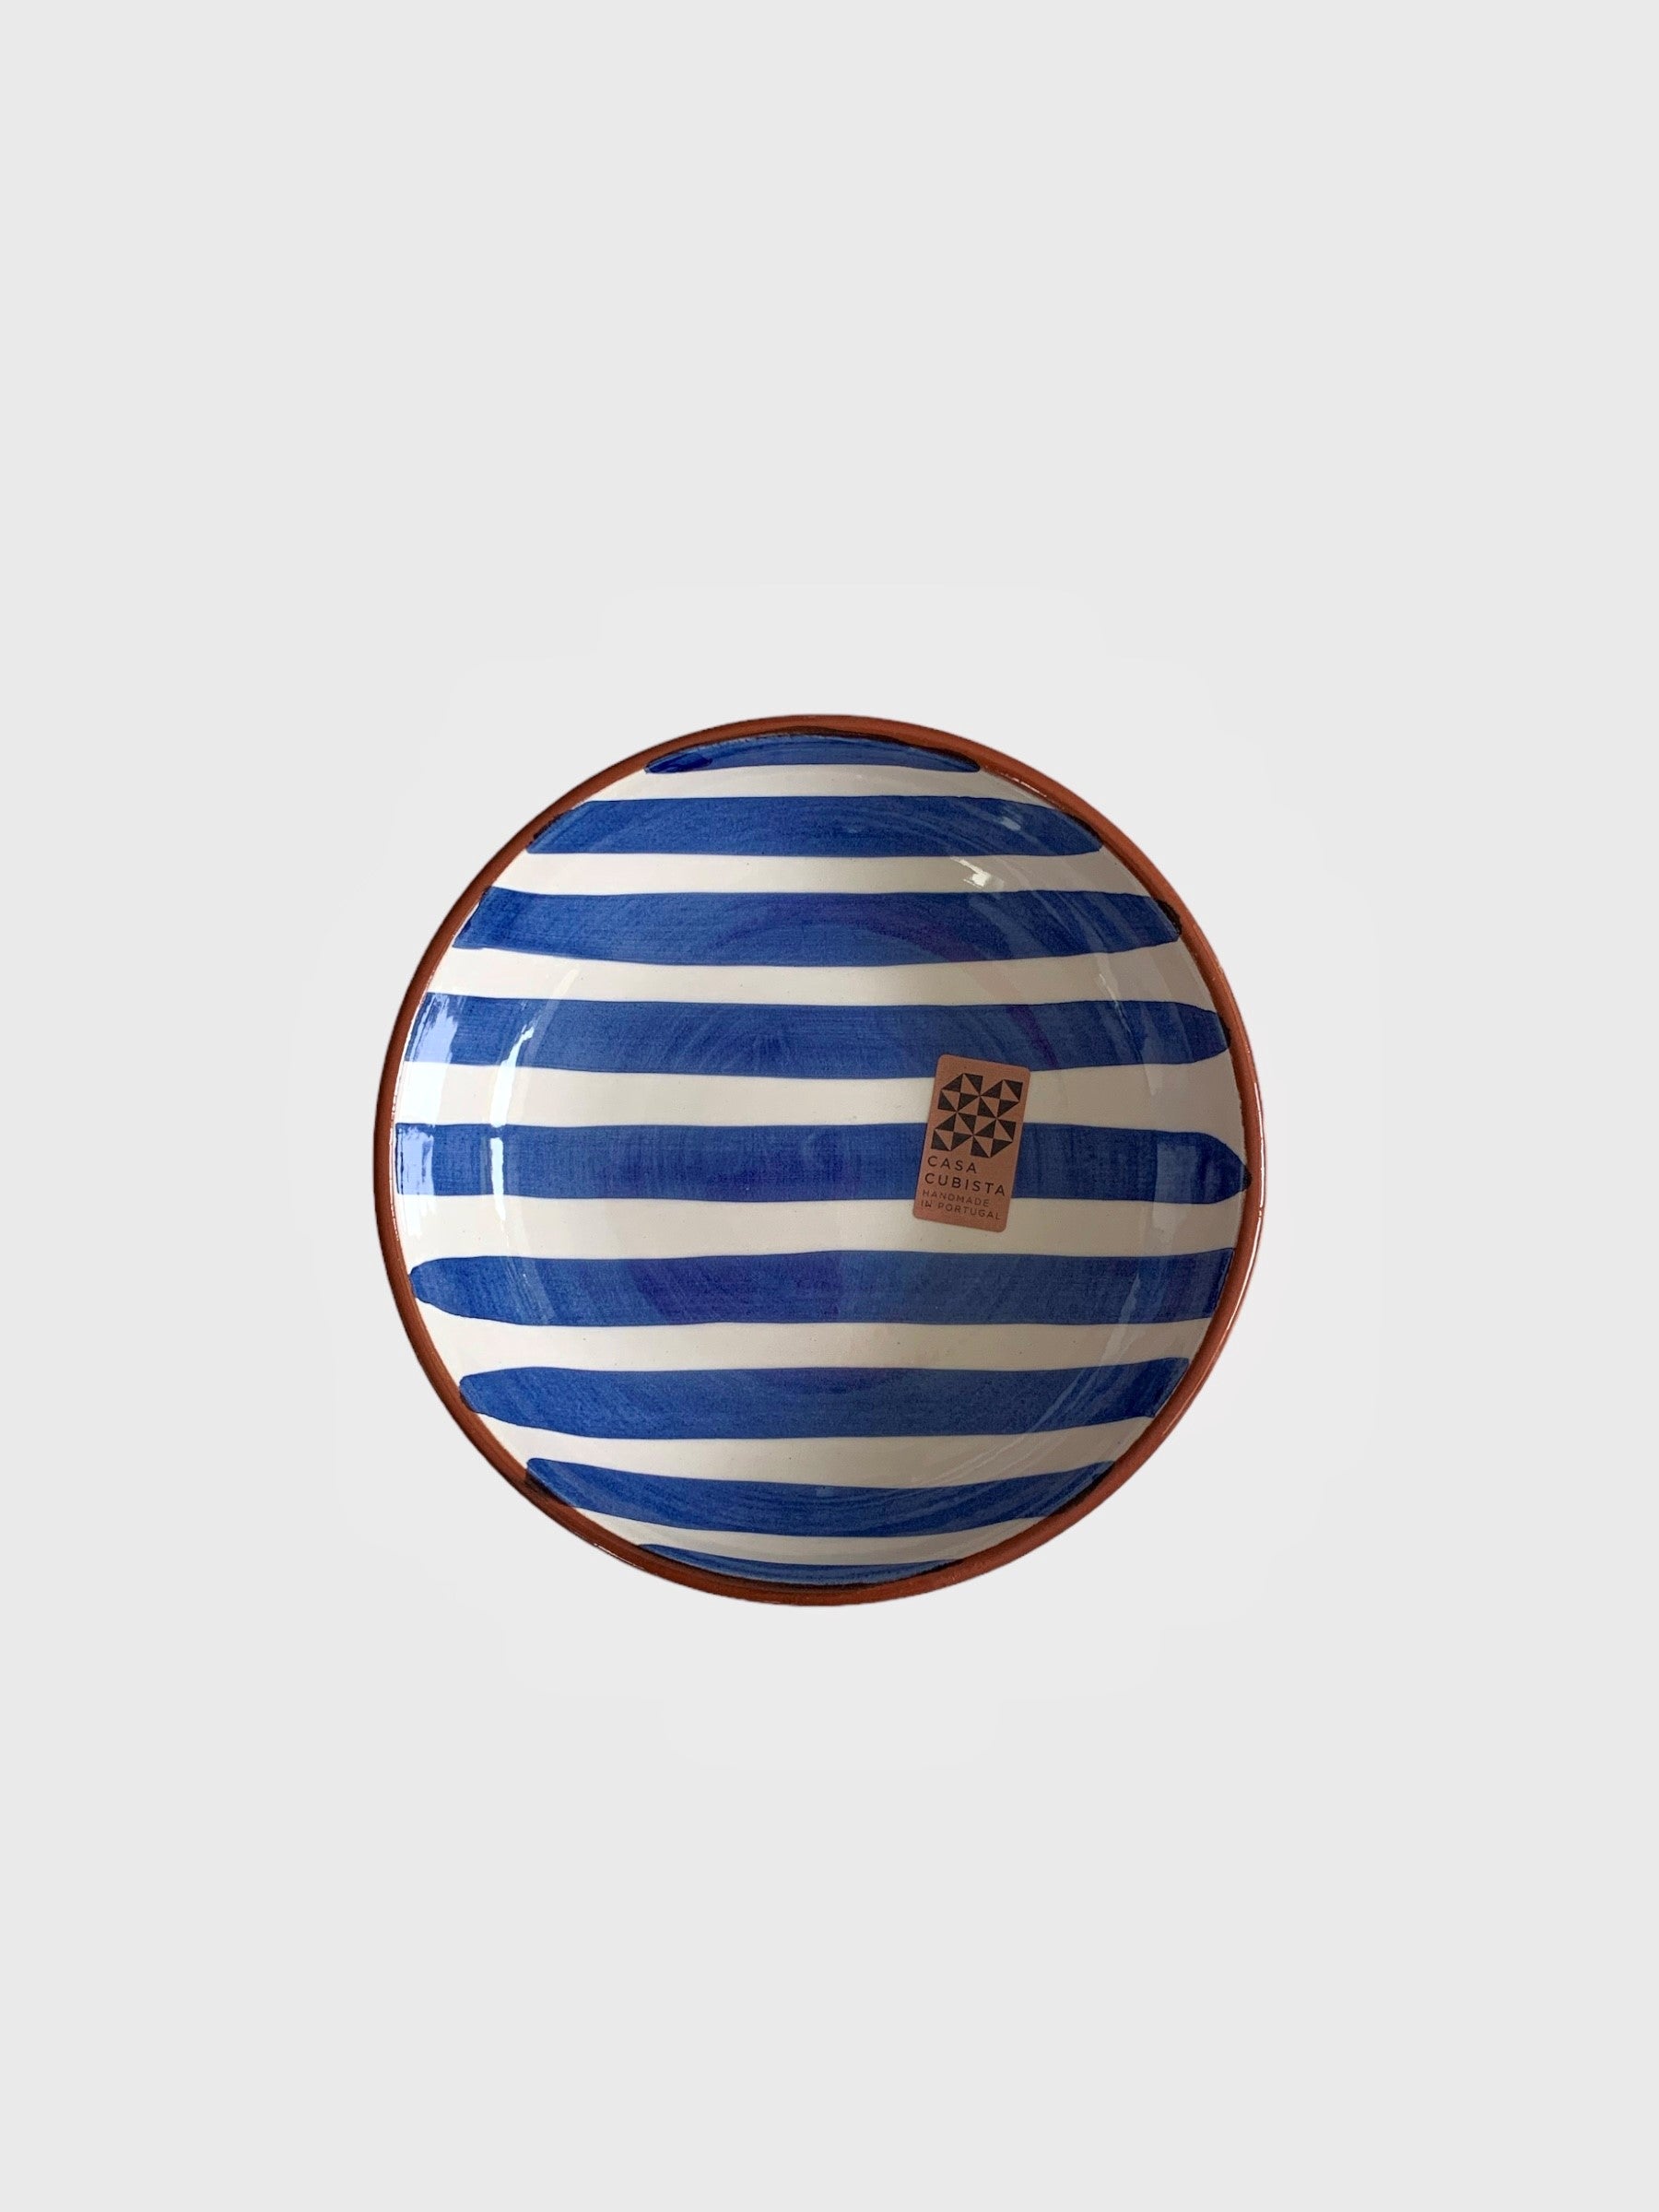 A small ceramic bowl with hand-painted bold blue stripes on it.  Made in Portugal from casa cubista